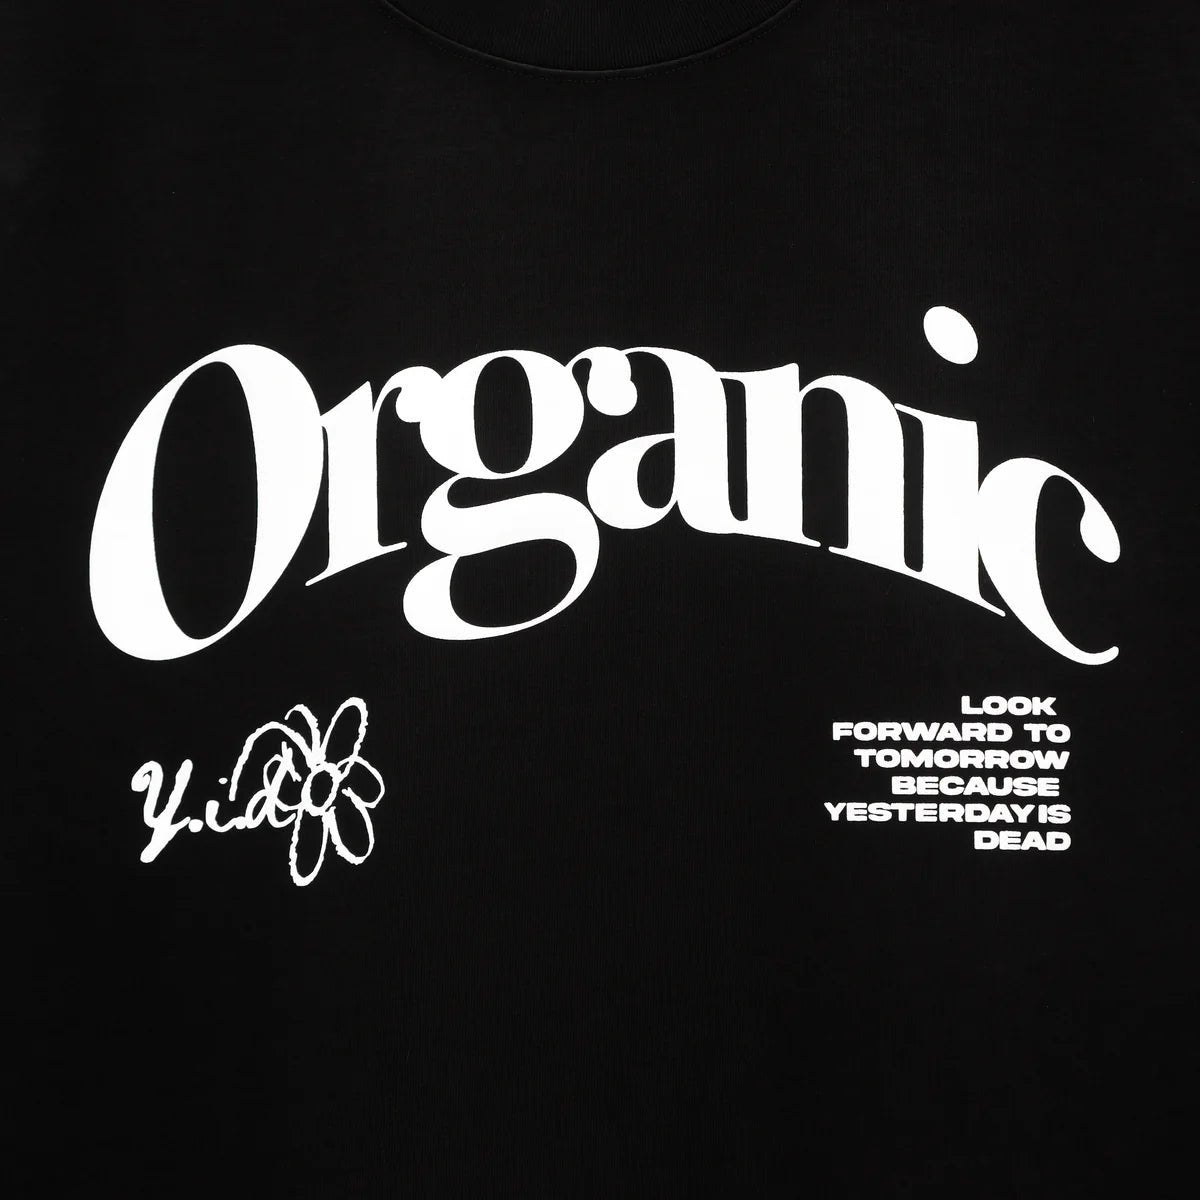 YESTERDAY IS DEAD Black 100% Cotton t-shirt with the word "organic" in large white letters, accompanied by a small graphic and the phrases "look forward to tomorrow because yesterday is dead" in white text.